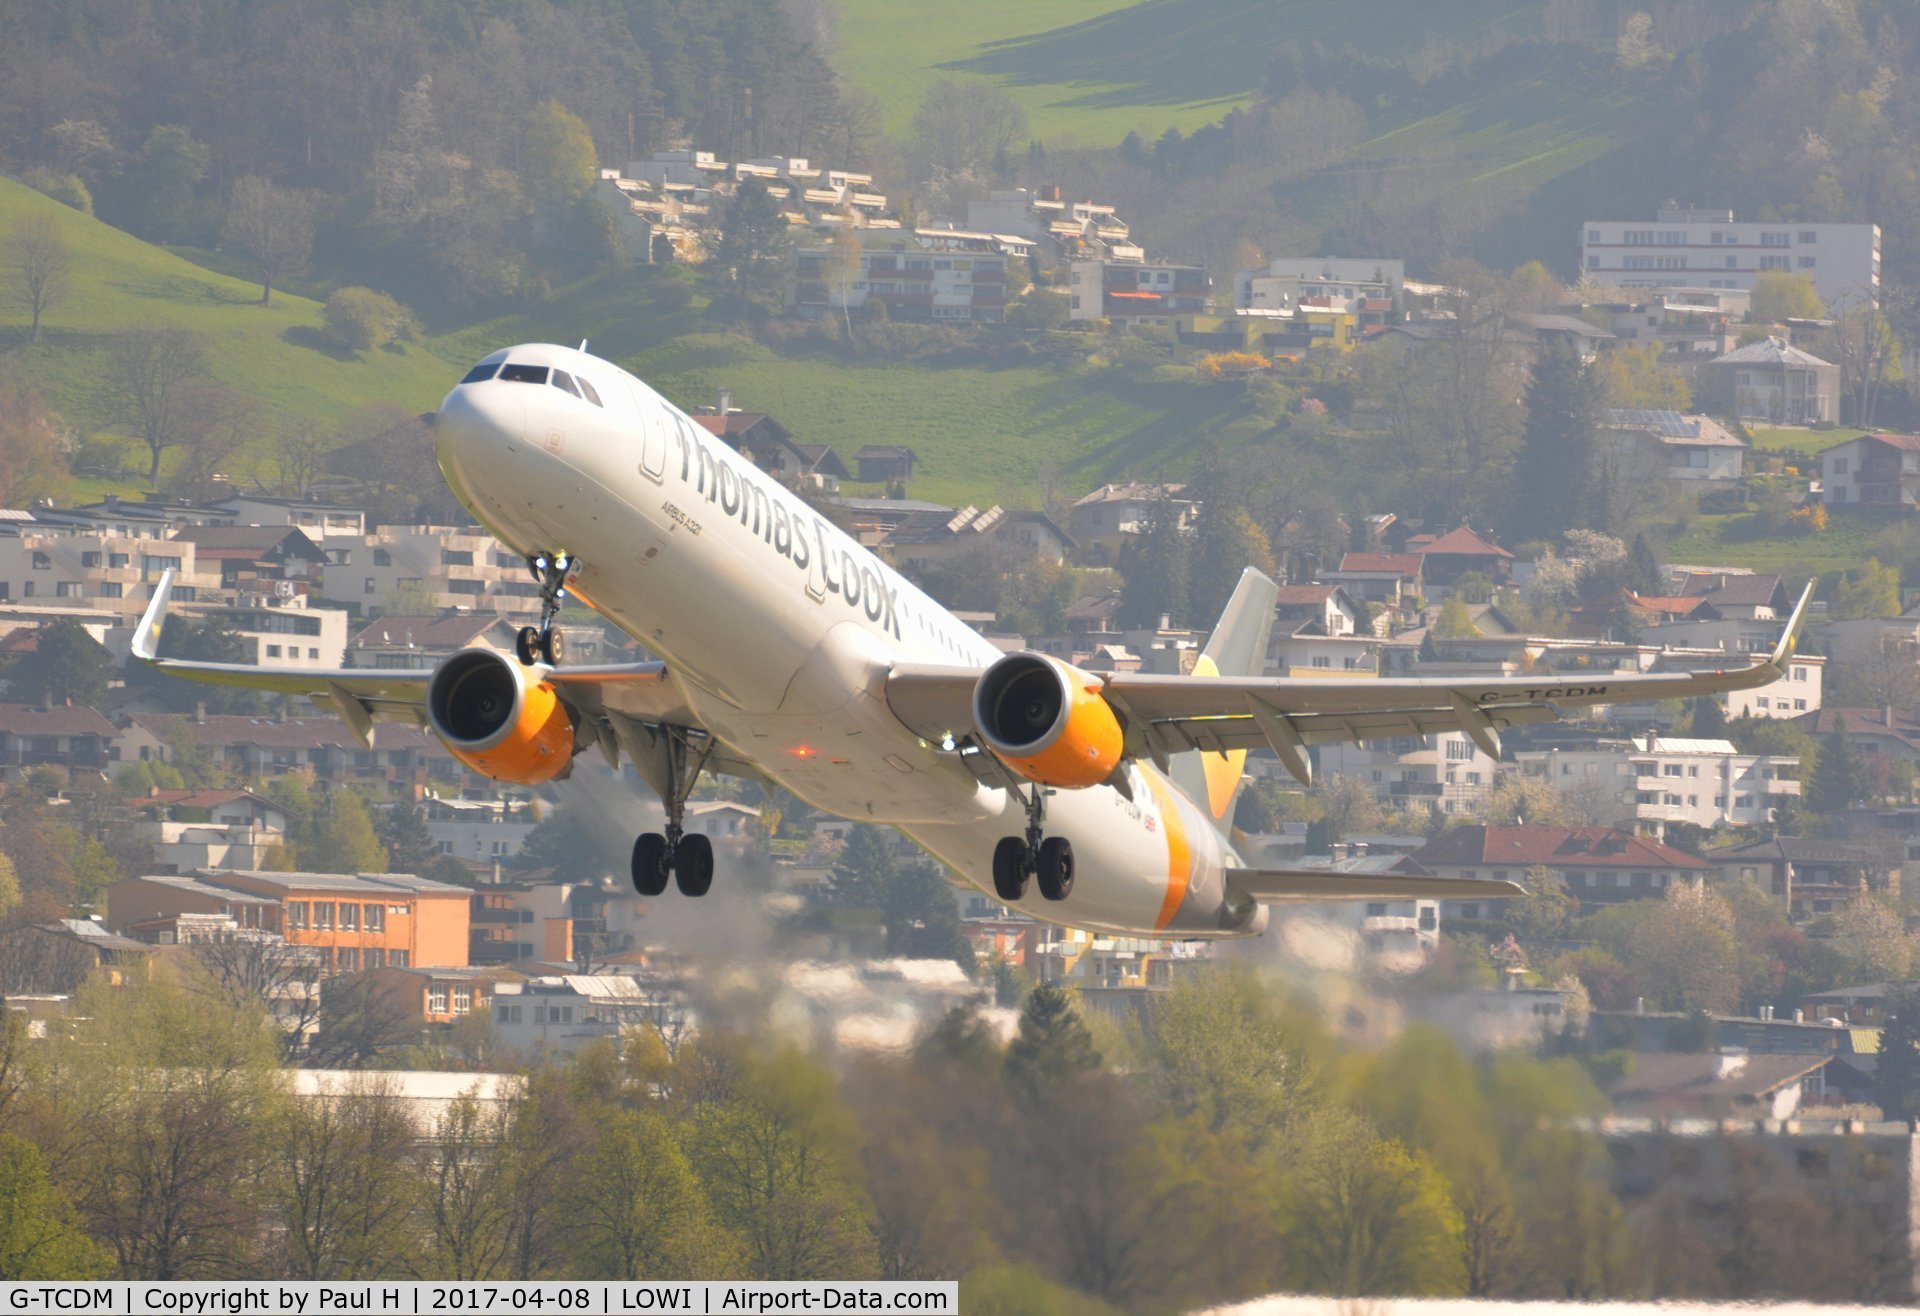 G-TCDM, 2016 Airbus A321-211 C/N 7003, Taking off from LOWI, with Innsbruck in the background